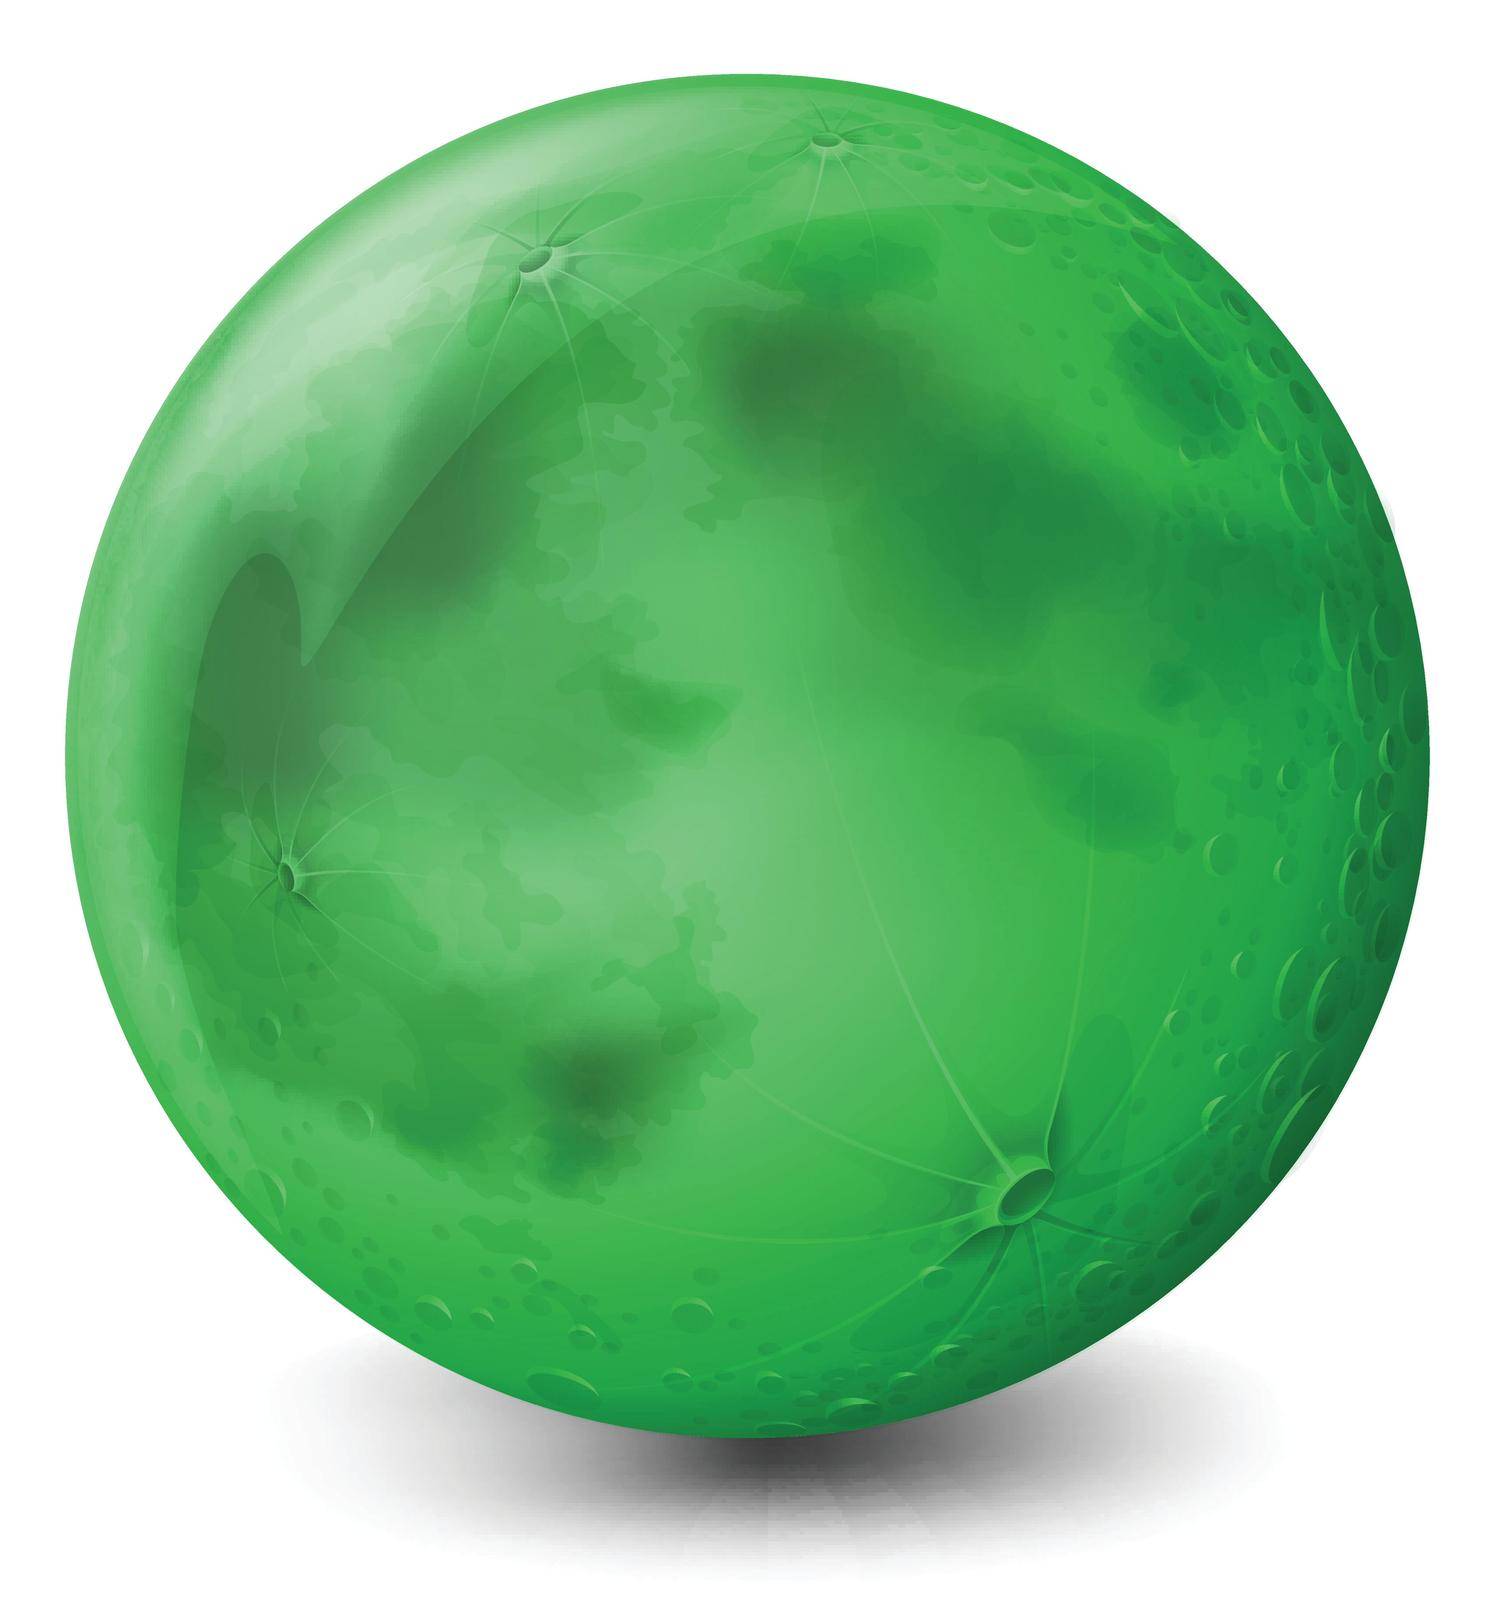 A green planet on a white background